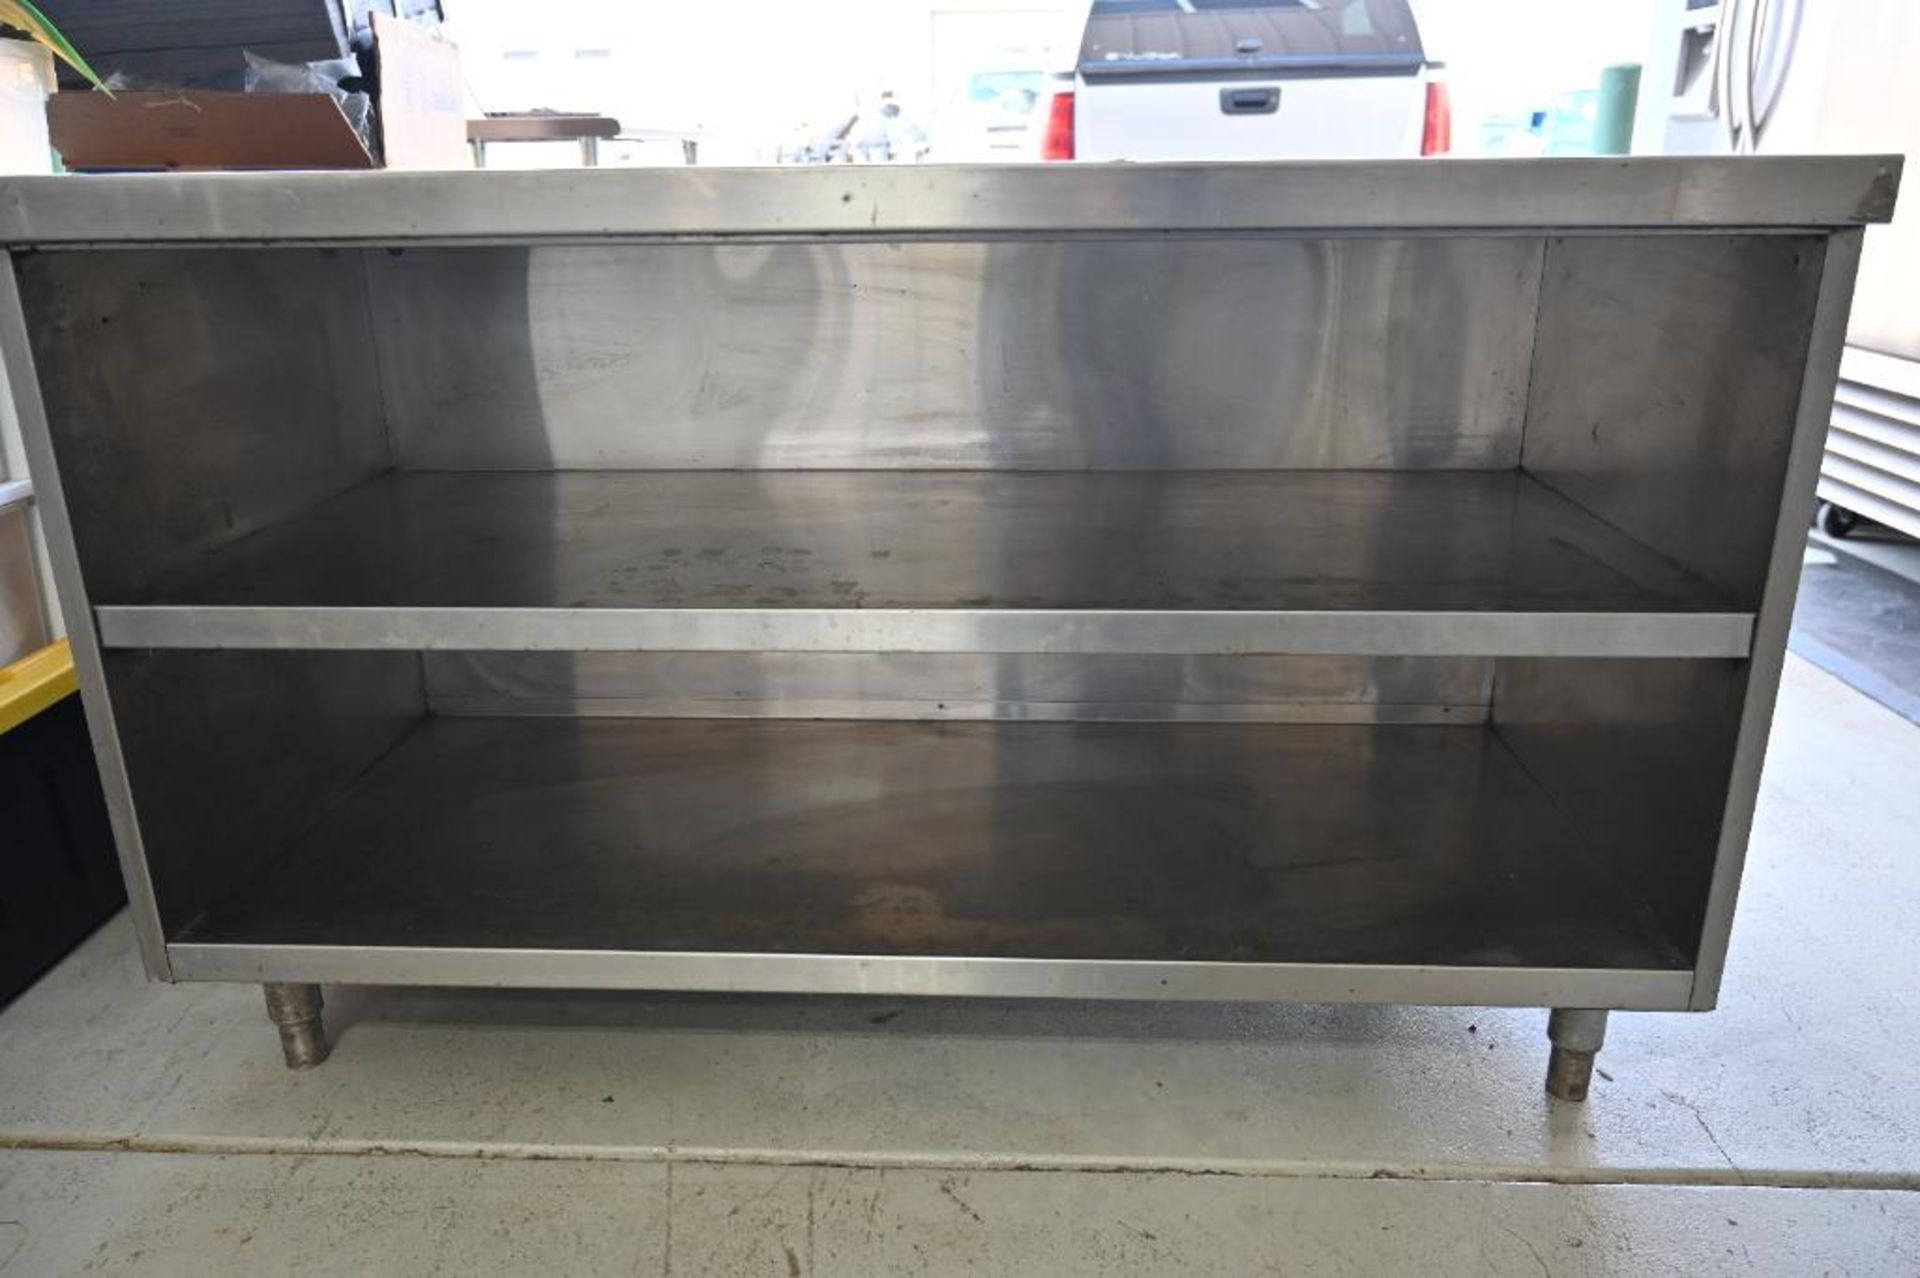 56.25" x 34" x 34.25" Stainless Steel Table with Two Shelves - Image 5 of 10